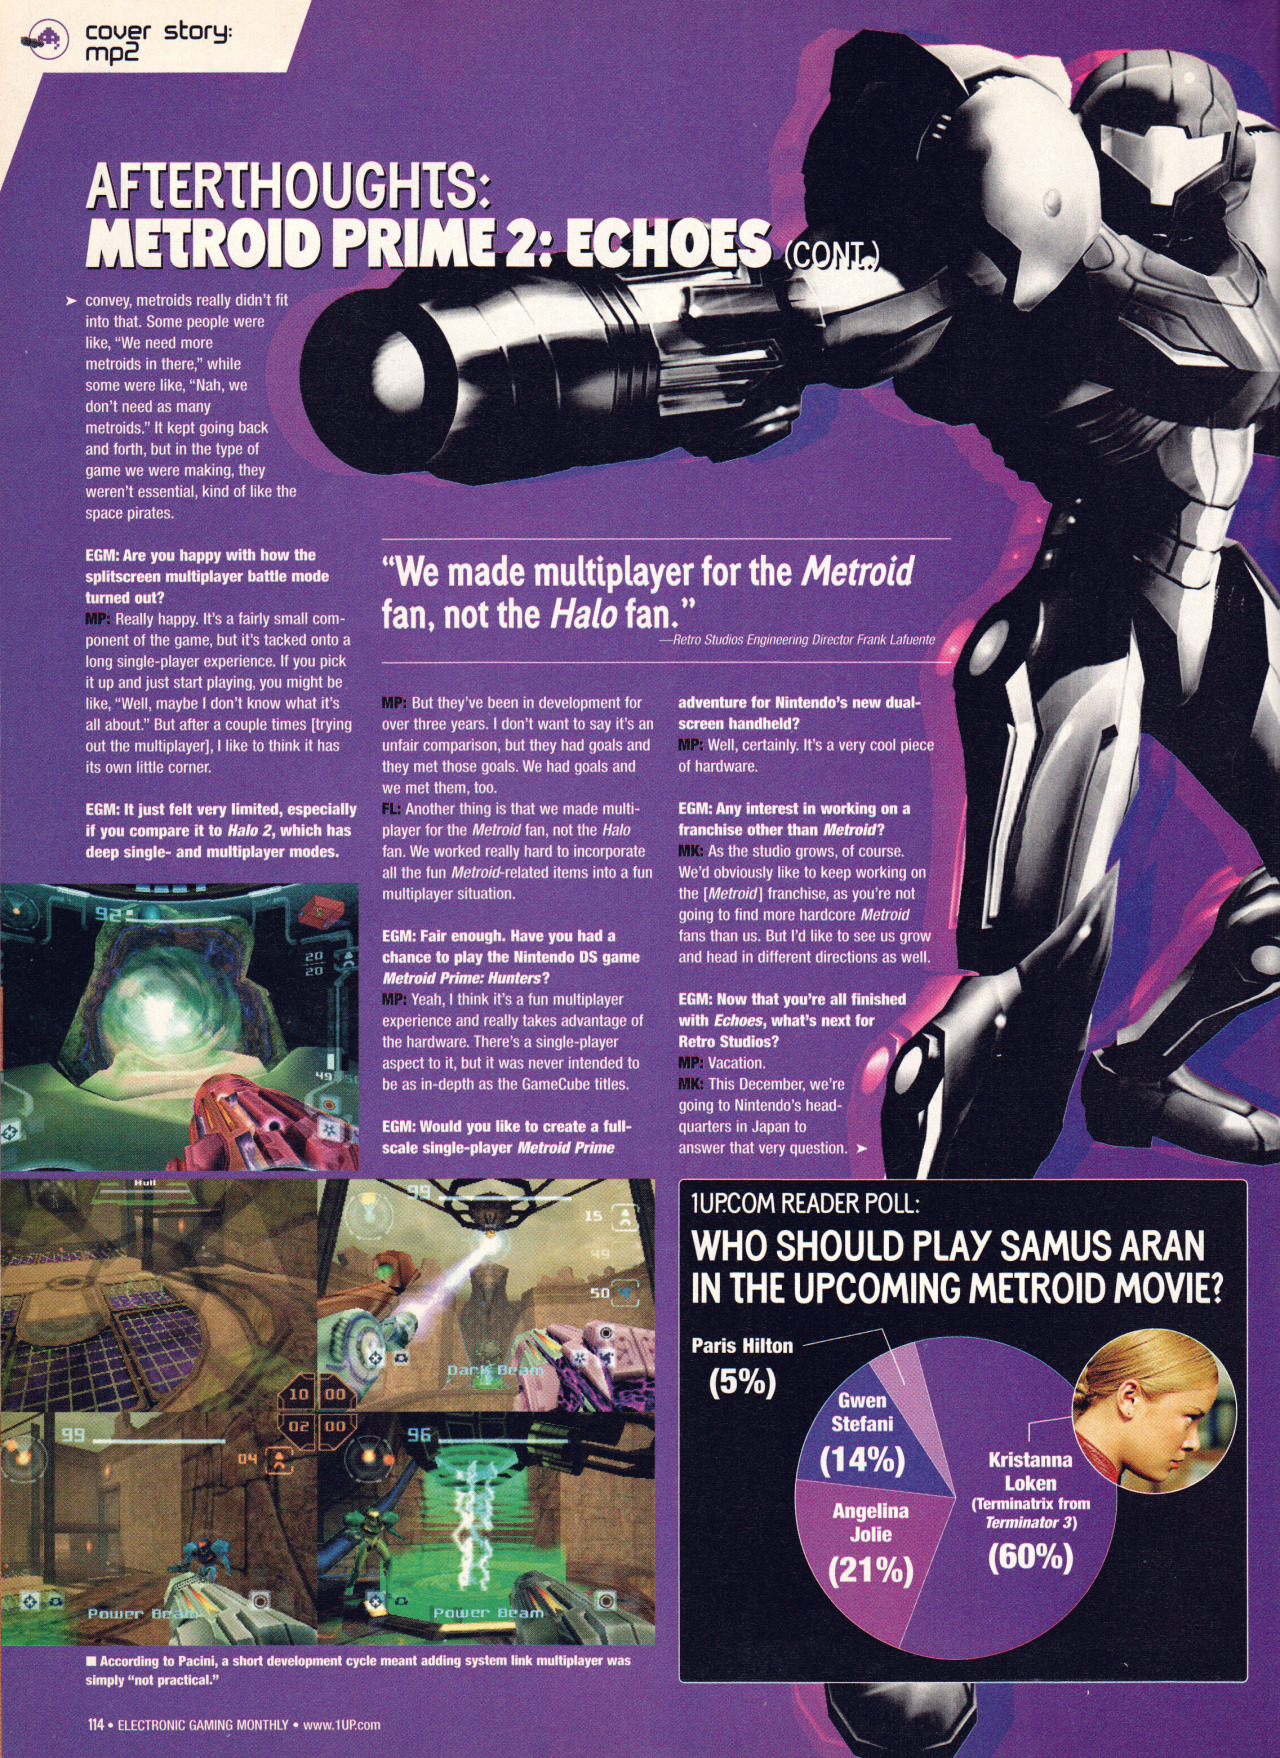 EGM #187
A big feature and interview on Metroid Prime 2: Echoes.